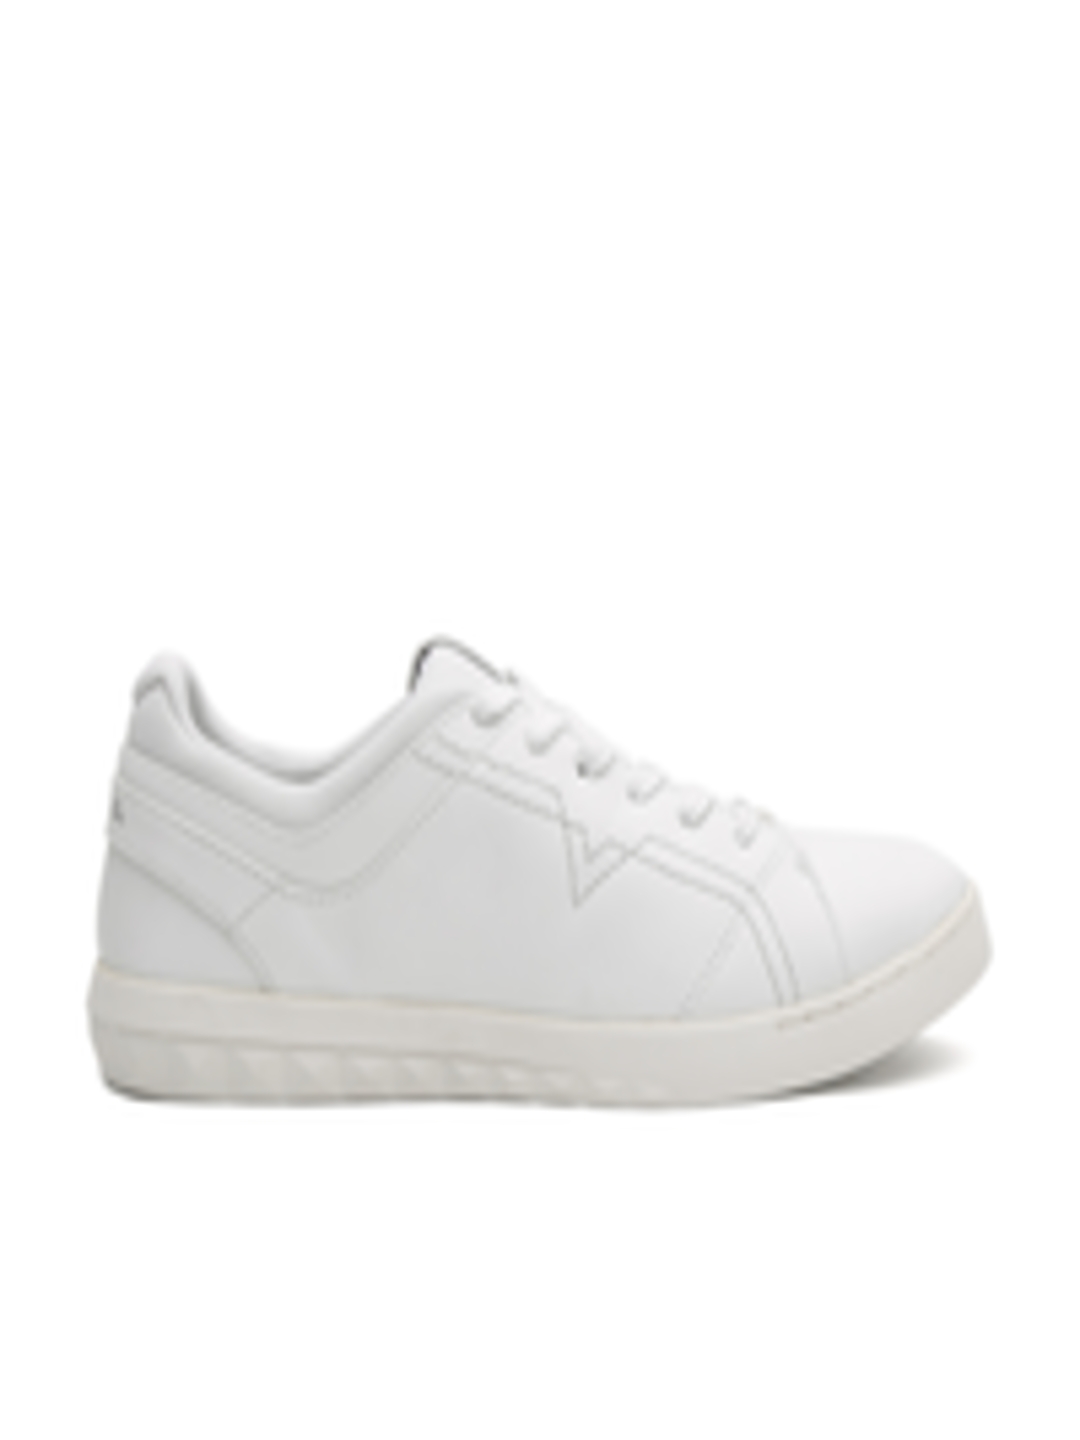 Buy DIESEL Men Off White Leather Sneakers - Casual Shoes for Men 2011316 | Myntra